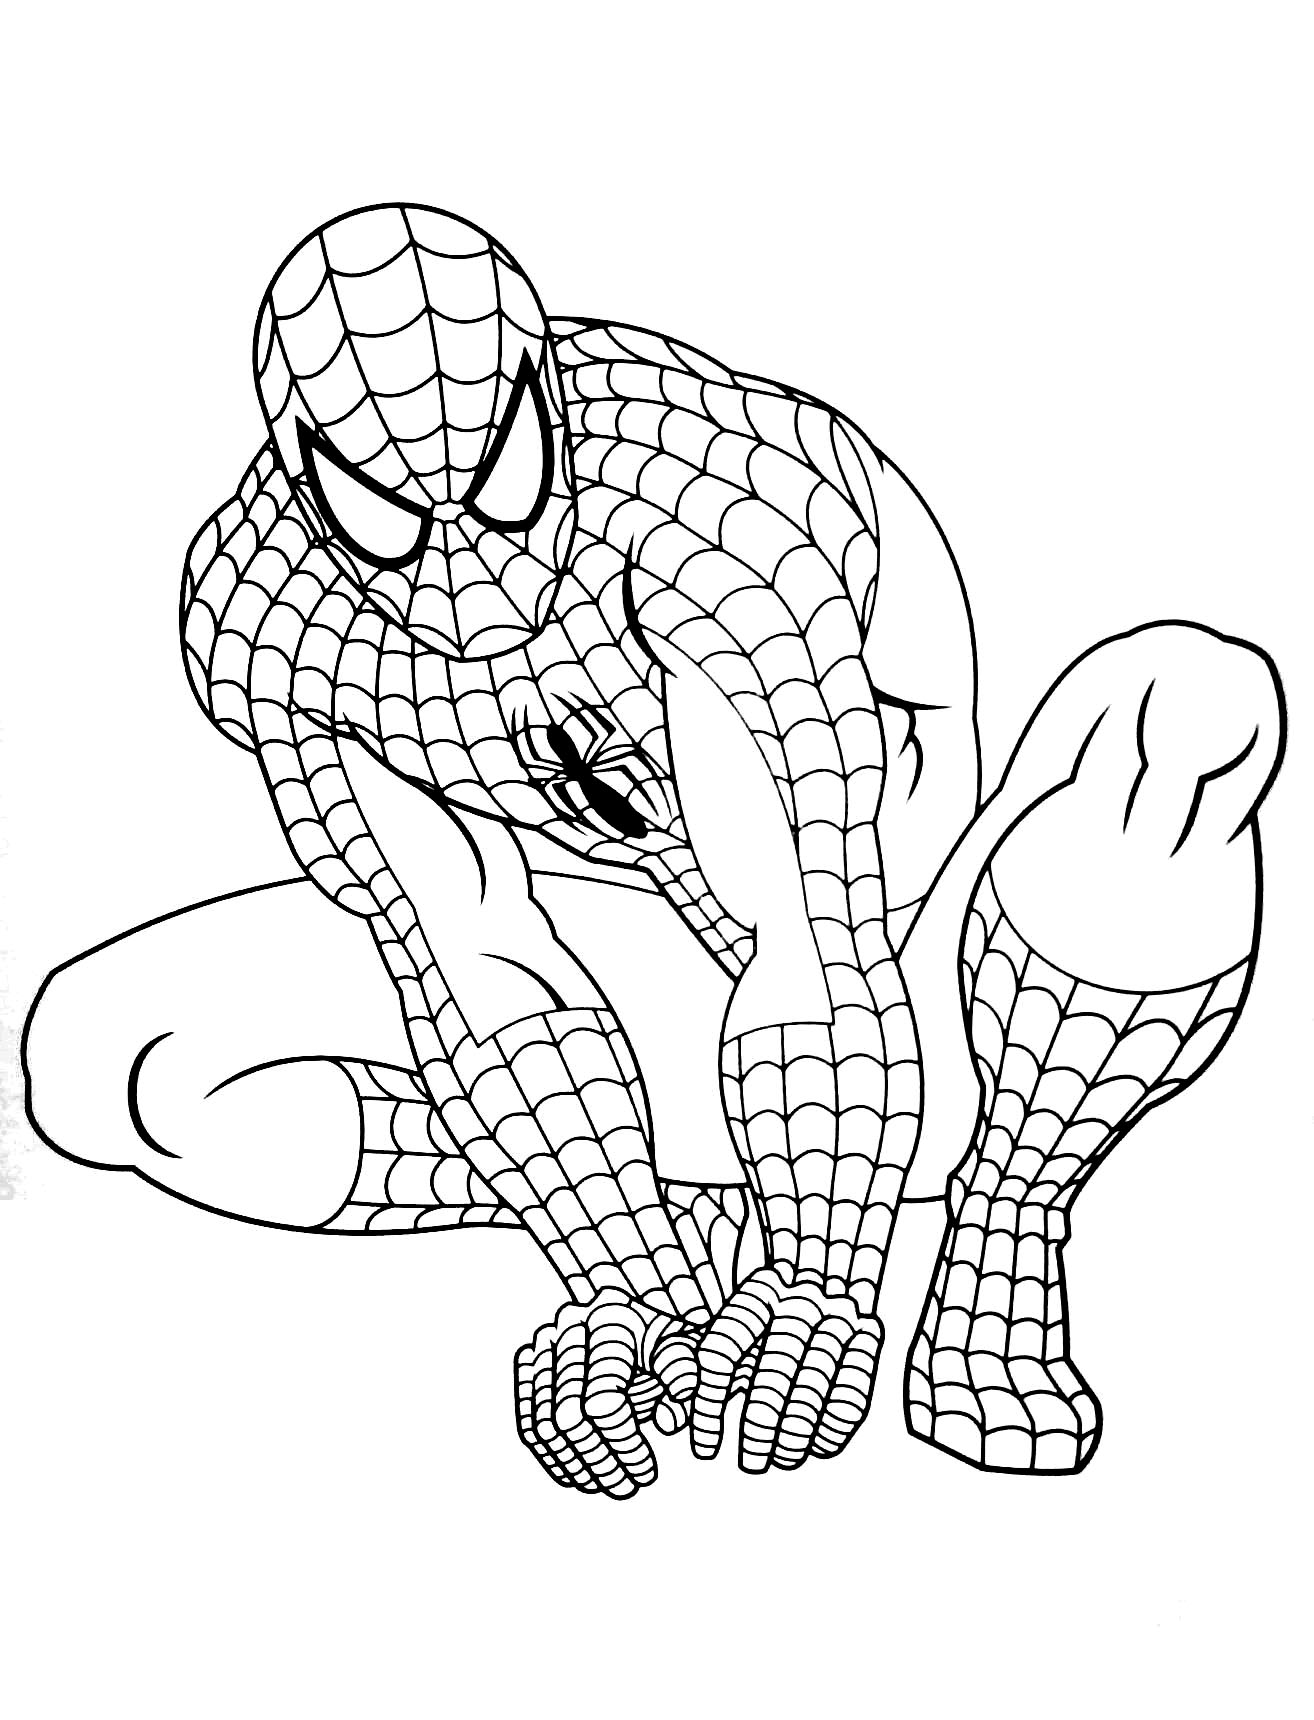 printable-pictures-of-spiderman-printable-word-searches